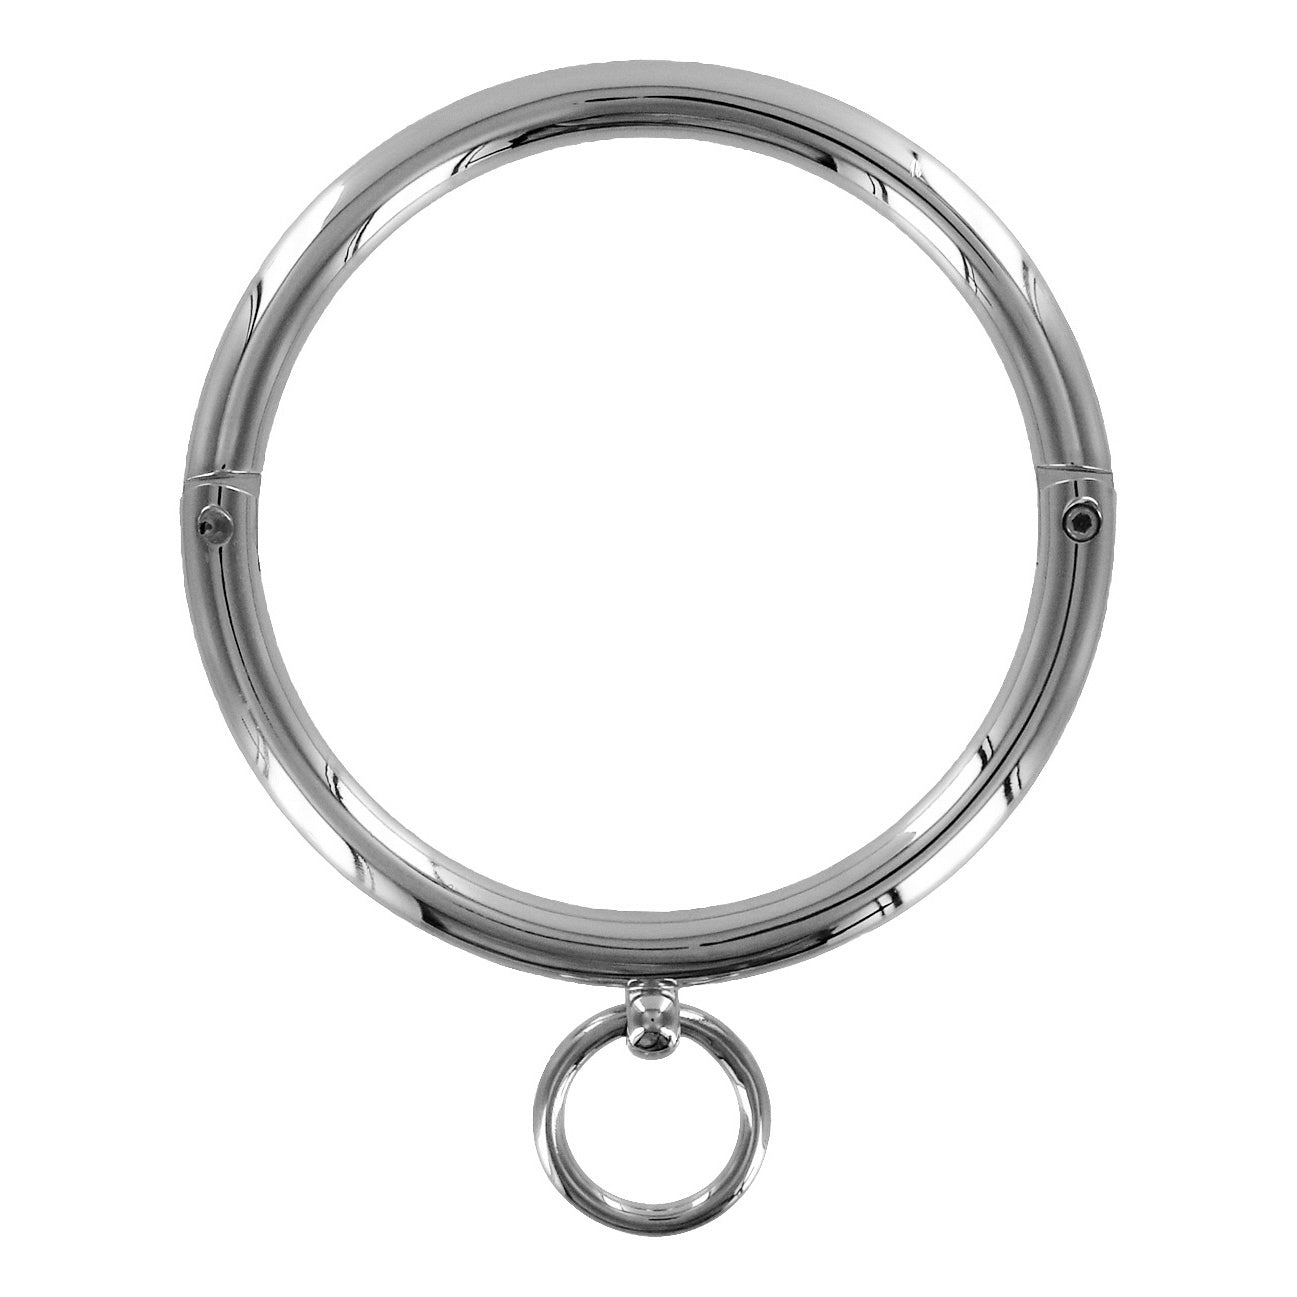 Ladies Rolled Steel Collar with Ring - UABDSM